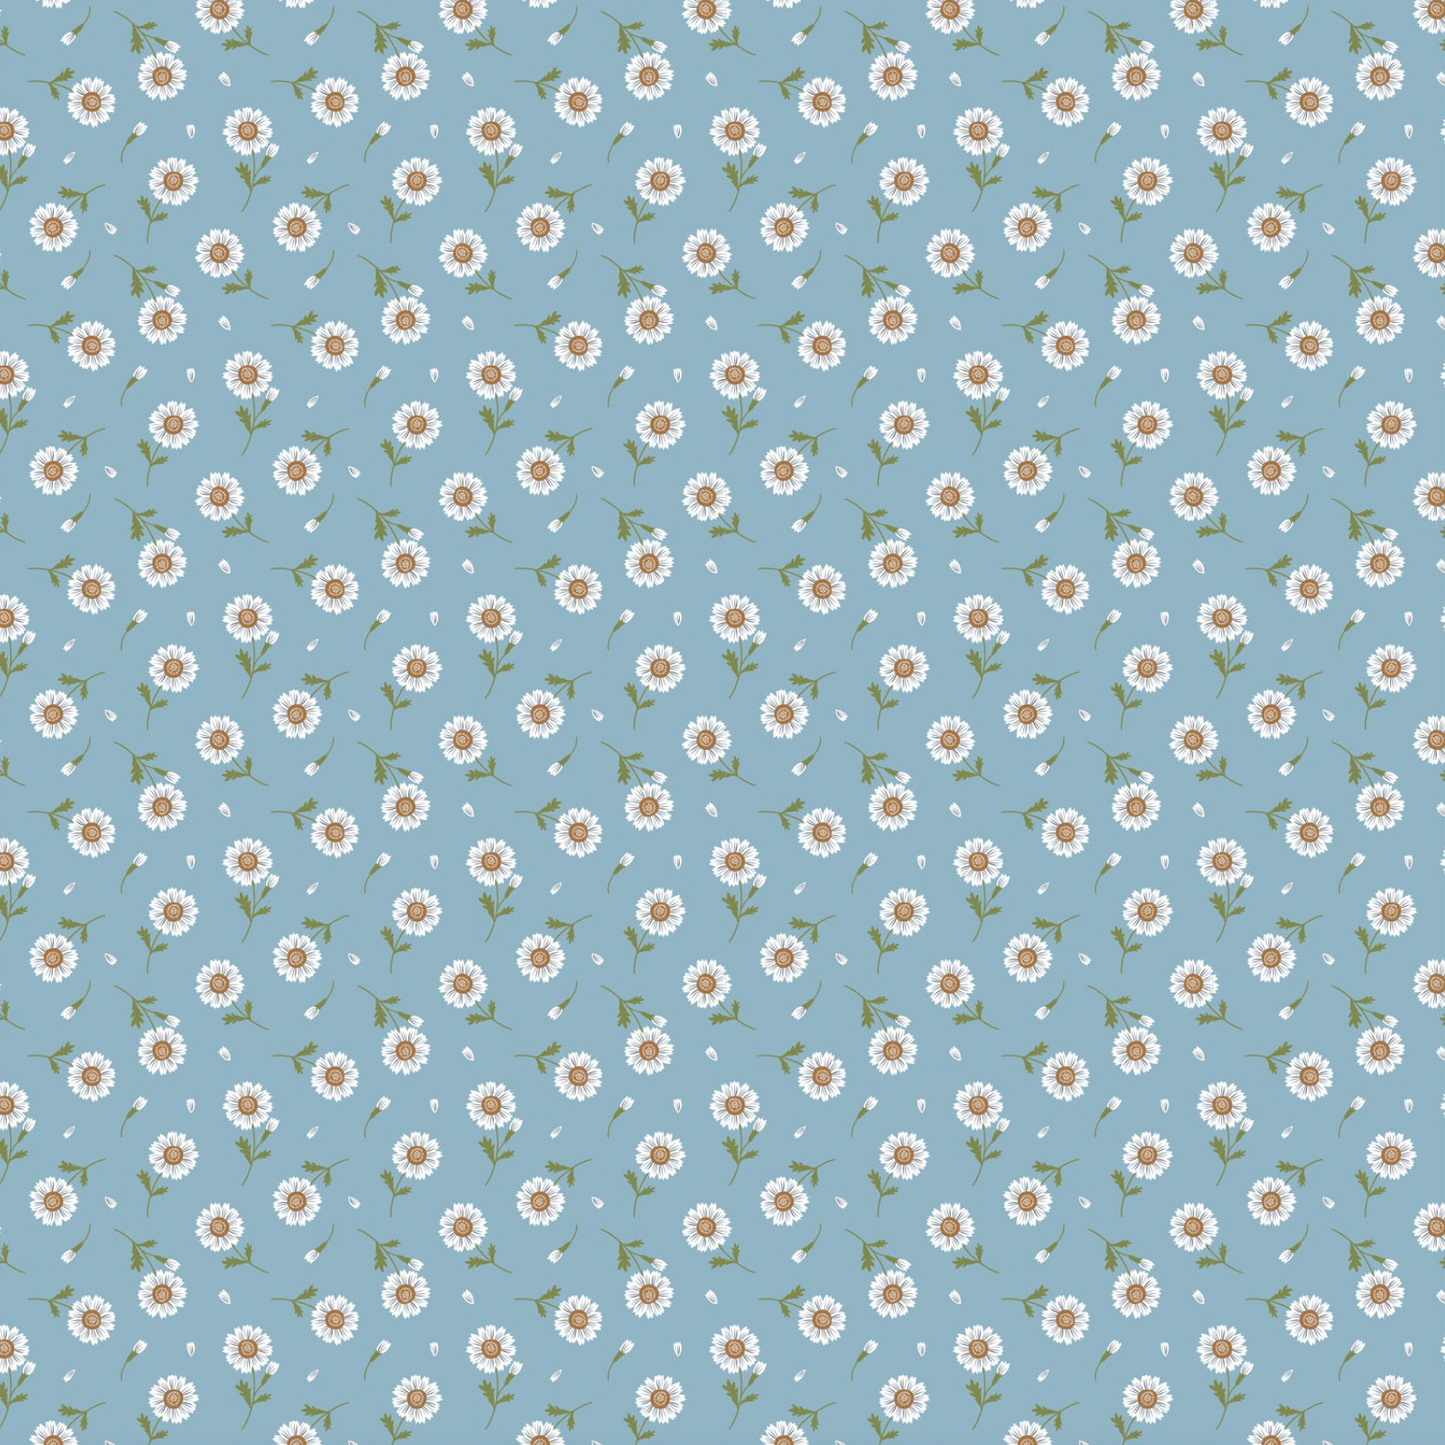 Sunshine & Chamomile, Tossed Daisies, Blue, SC23505, sold by the 1/2 yard